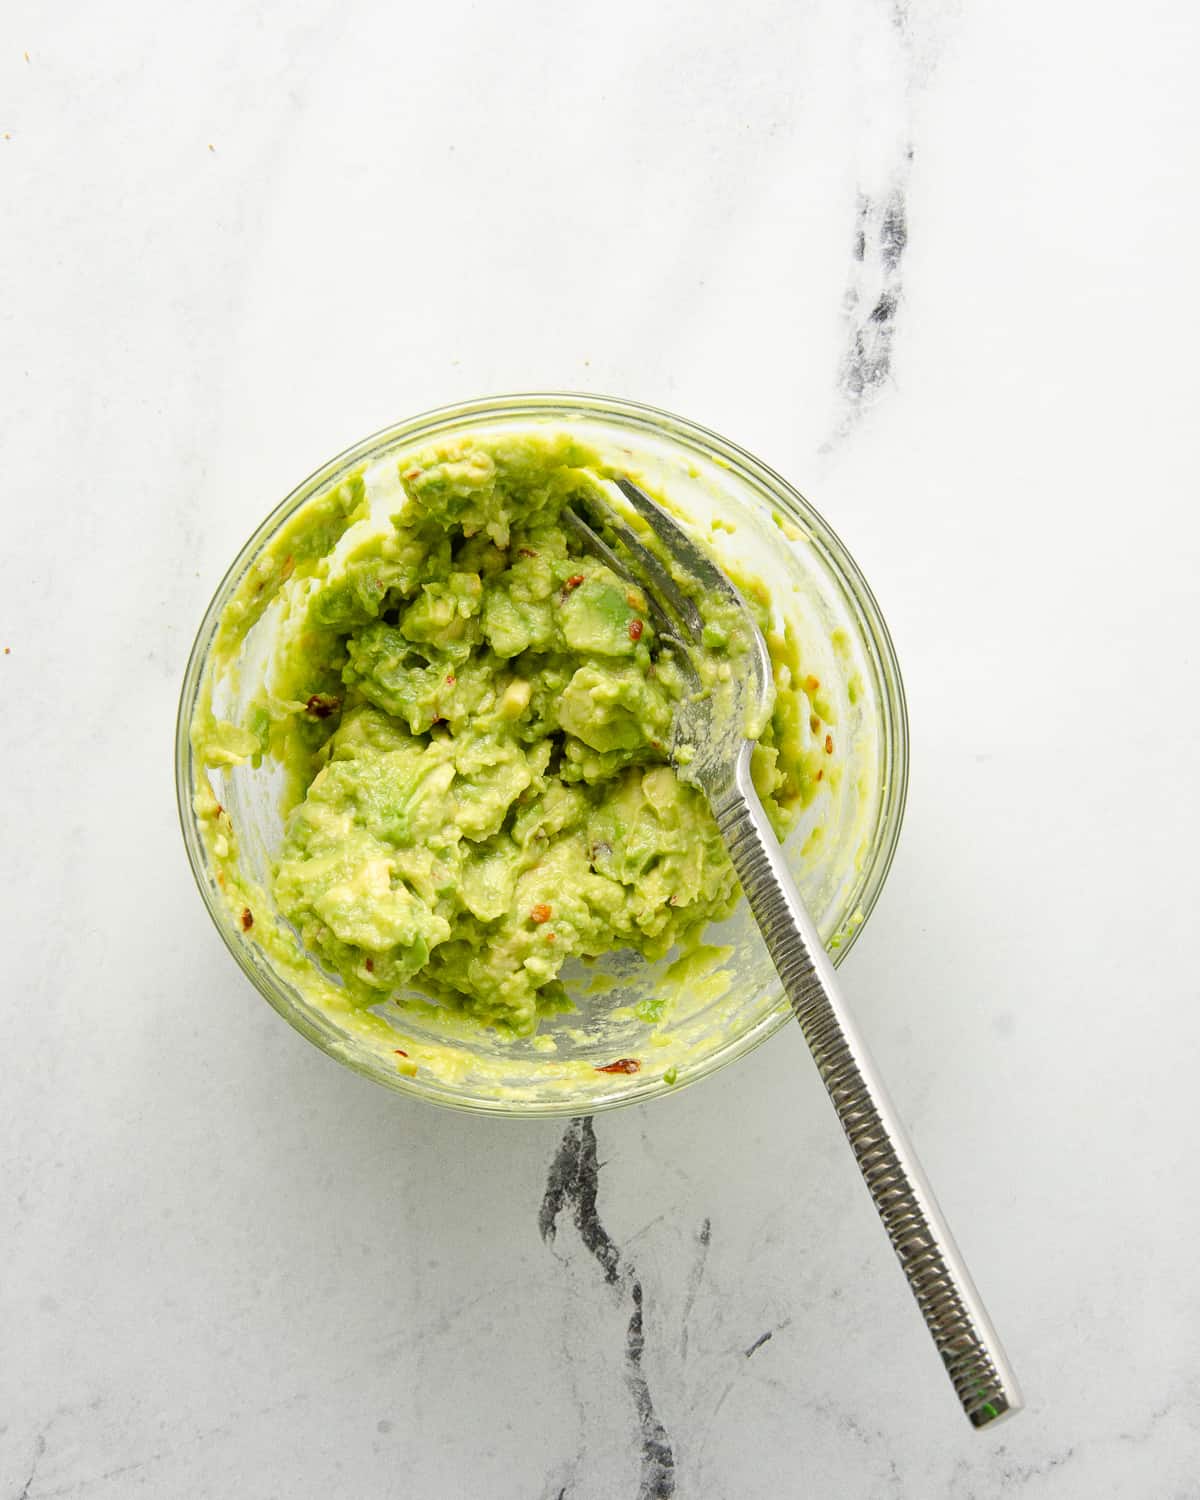 A glass bowl with mashed avocado and a fork.